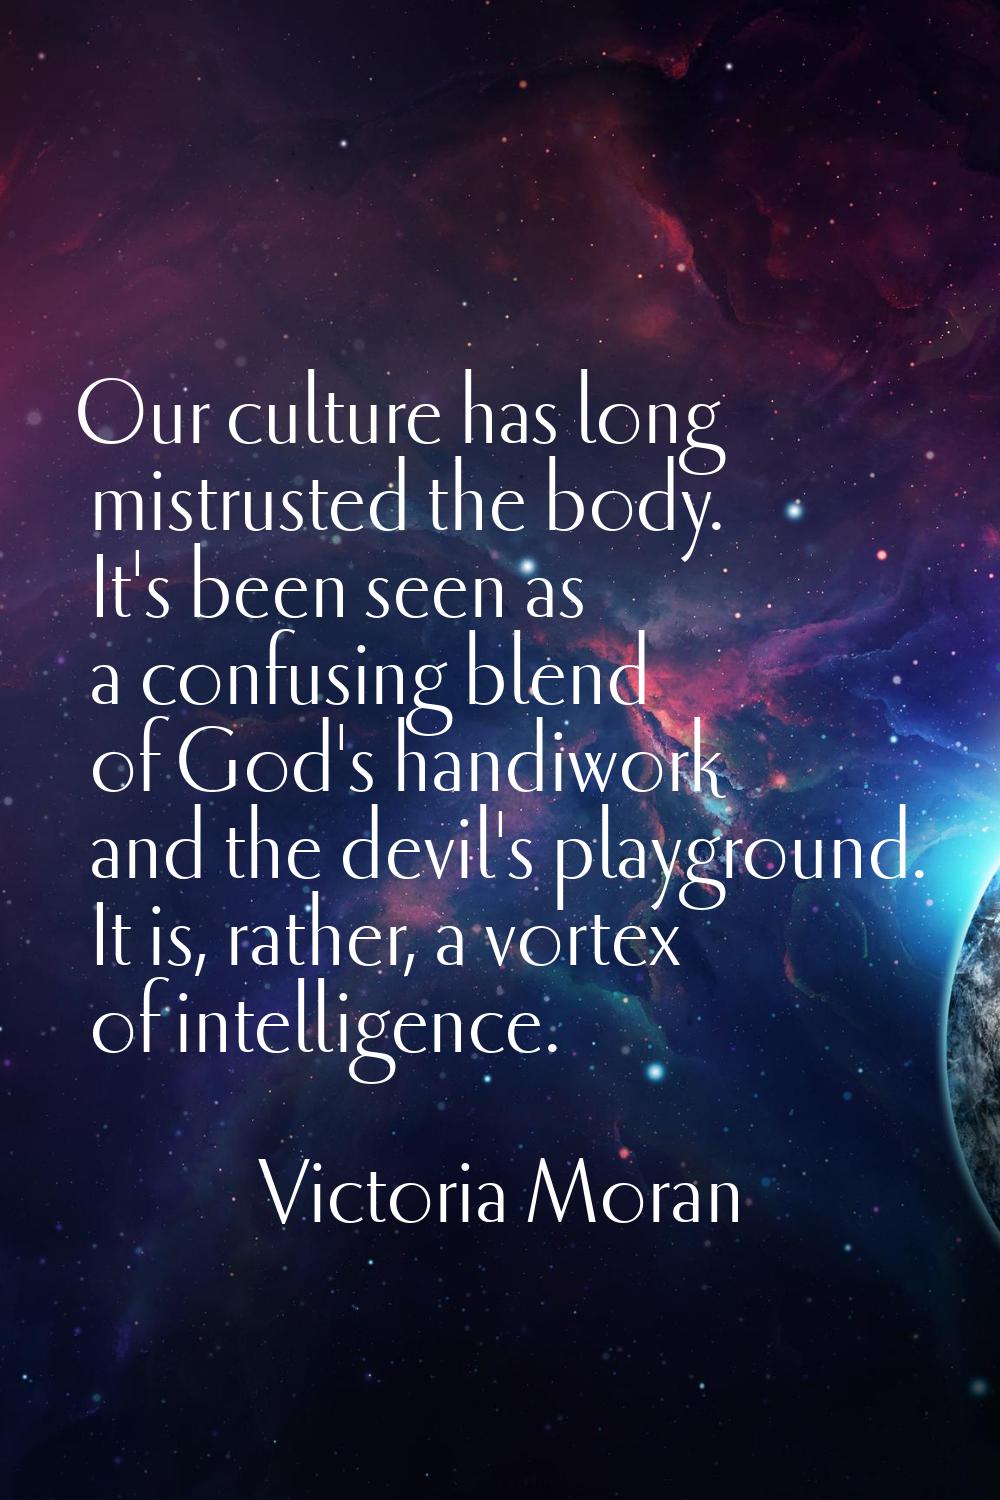 Our culture has long mistrusted the body. It's been seen as a confusing blend of God's handiwork an